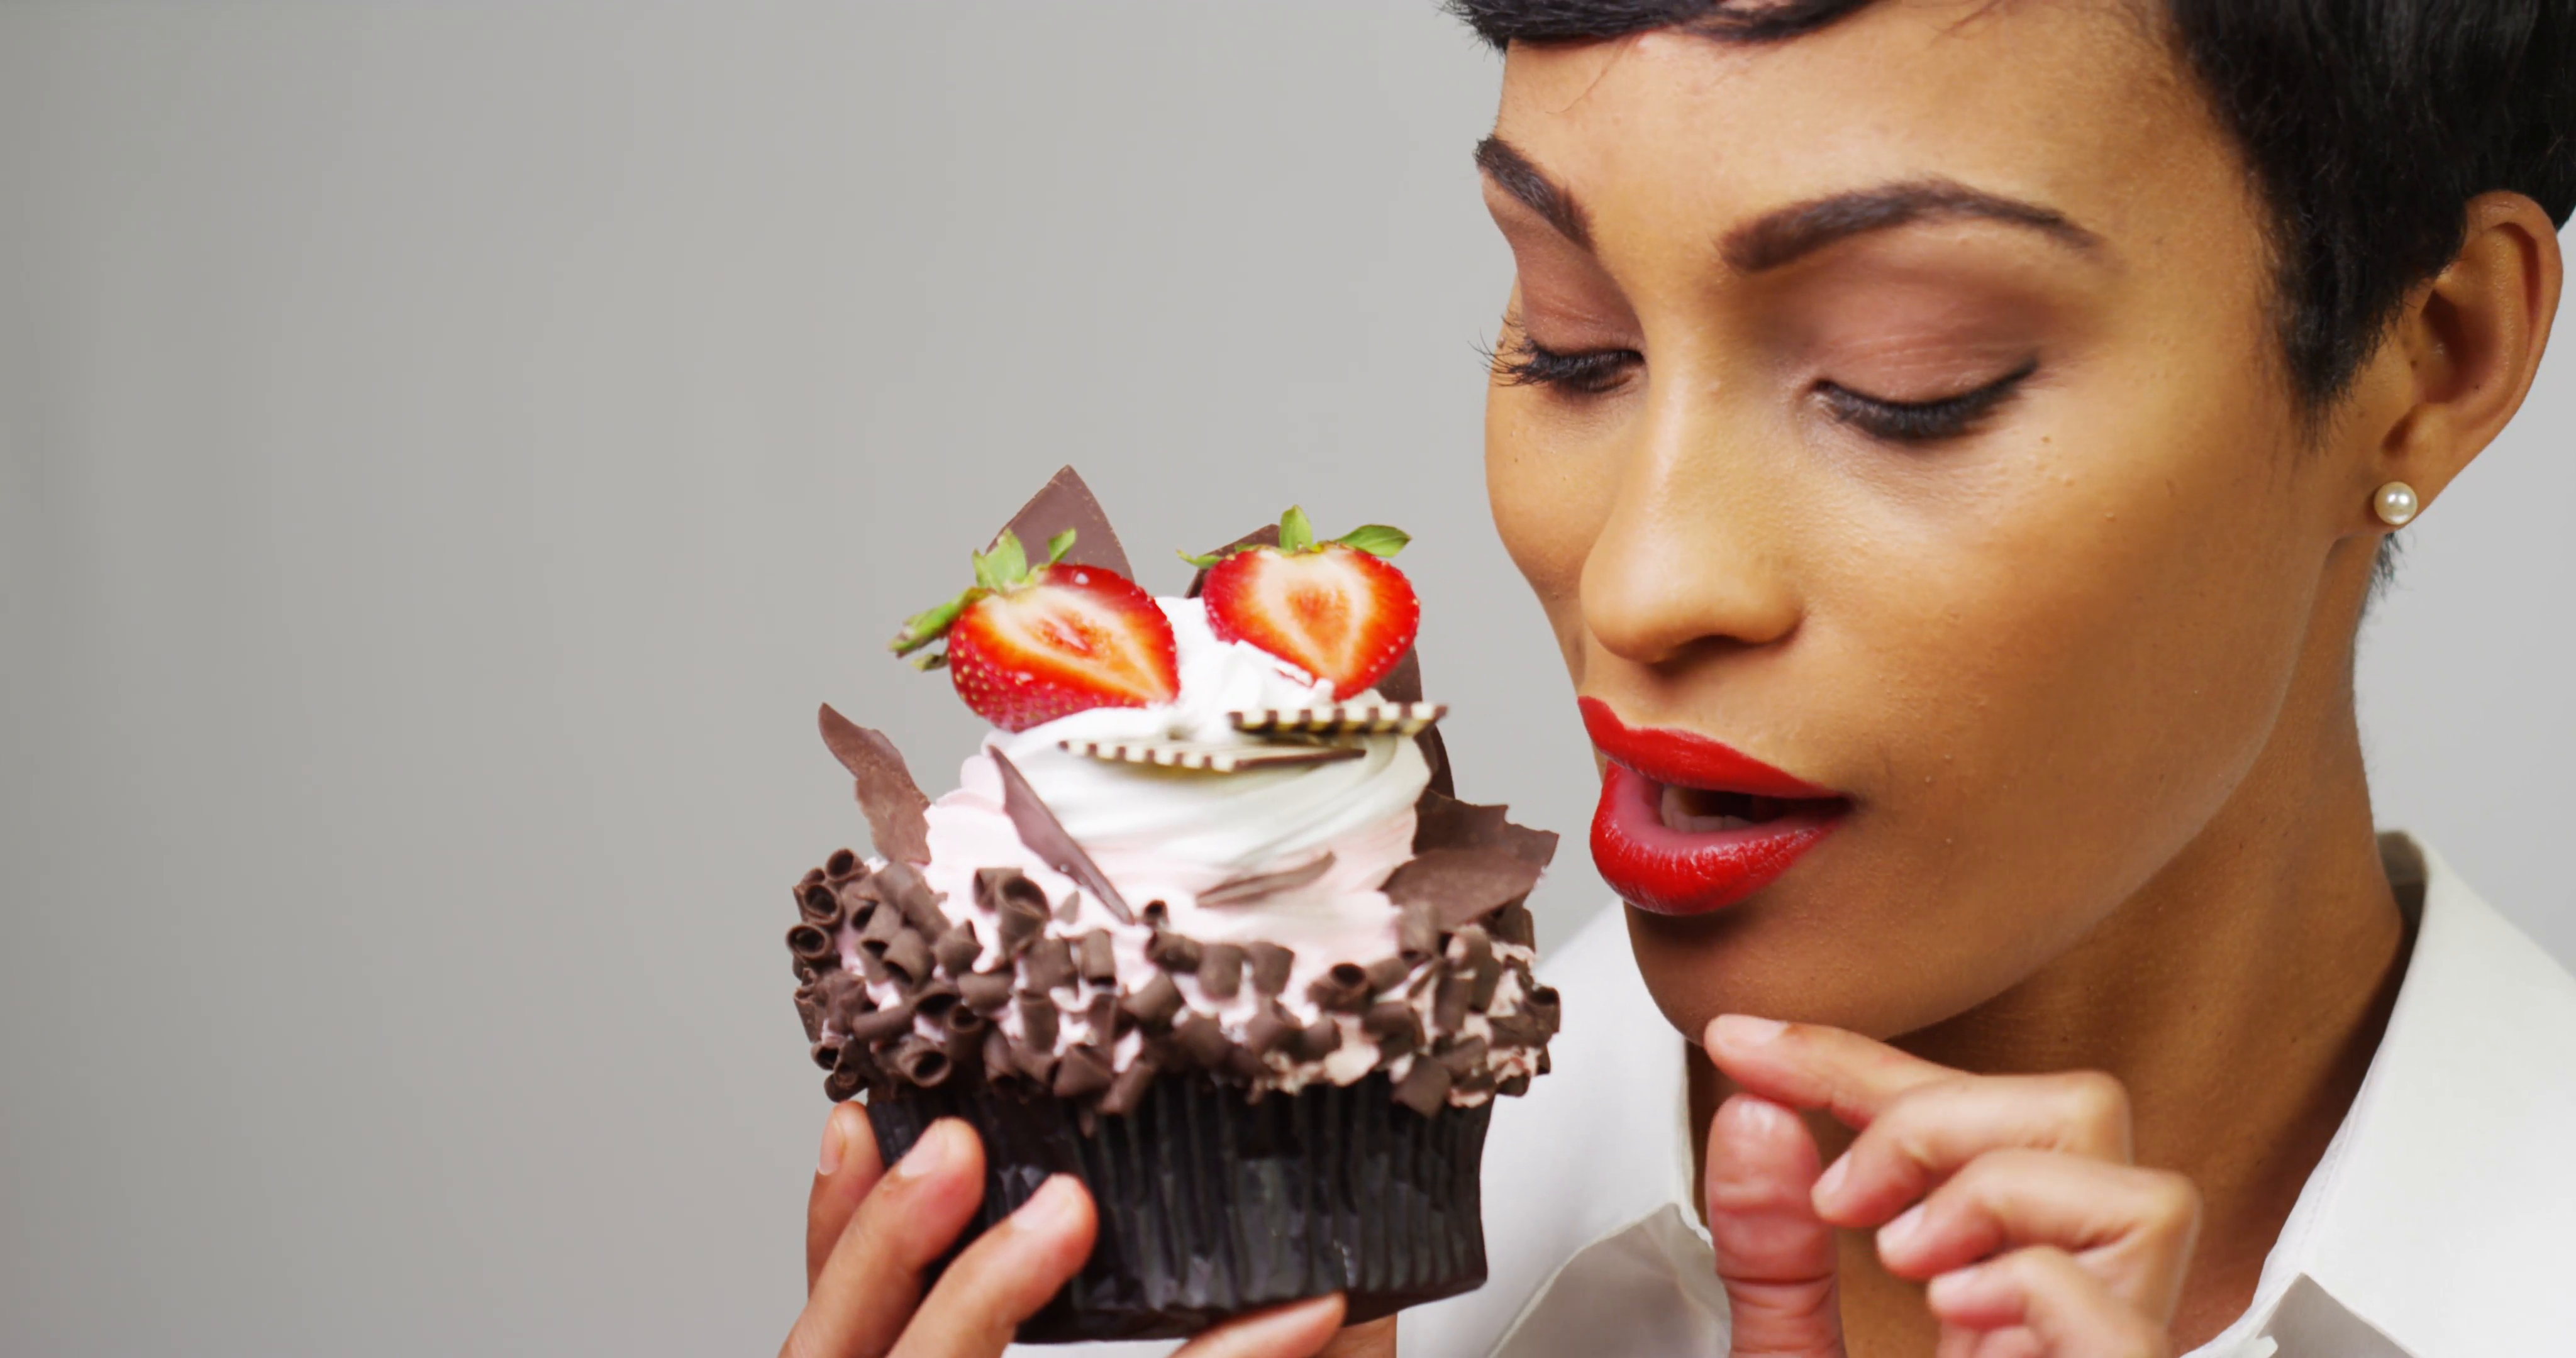 Woman admiring a fancy dessert cupcake with chocolate and ...